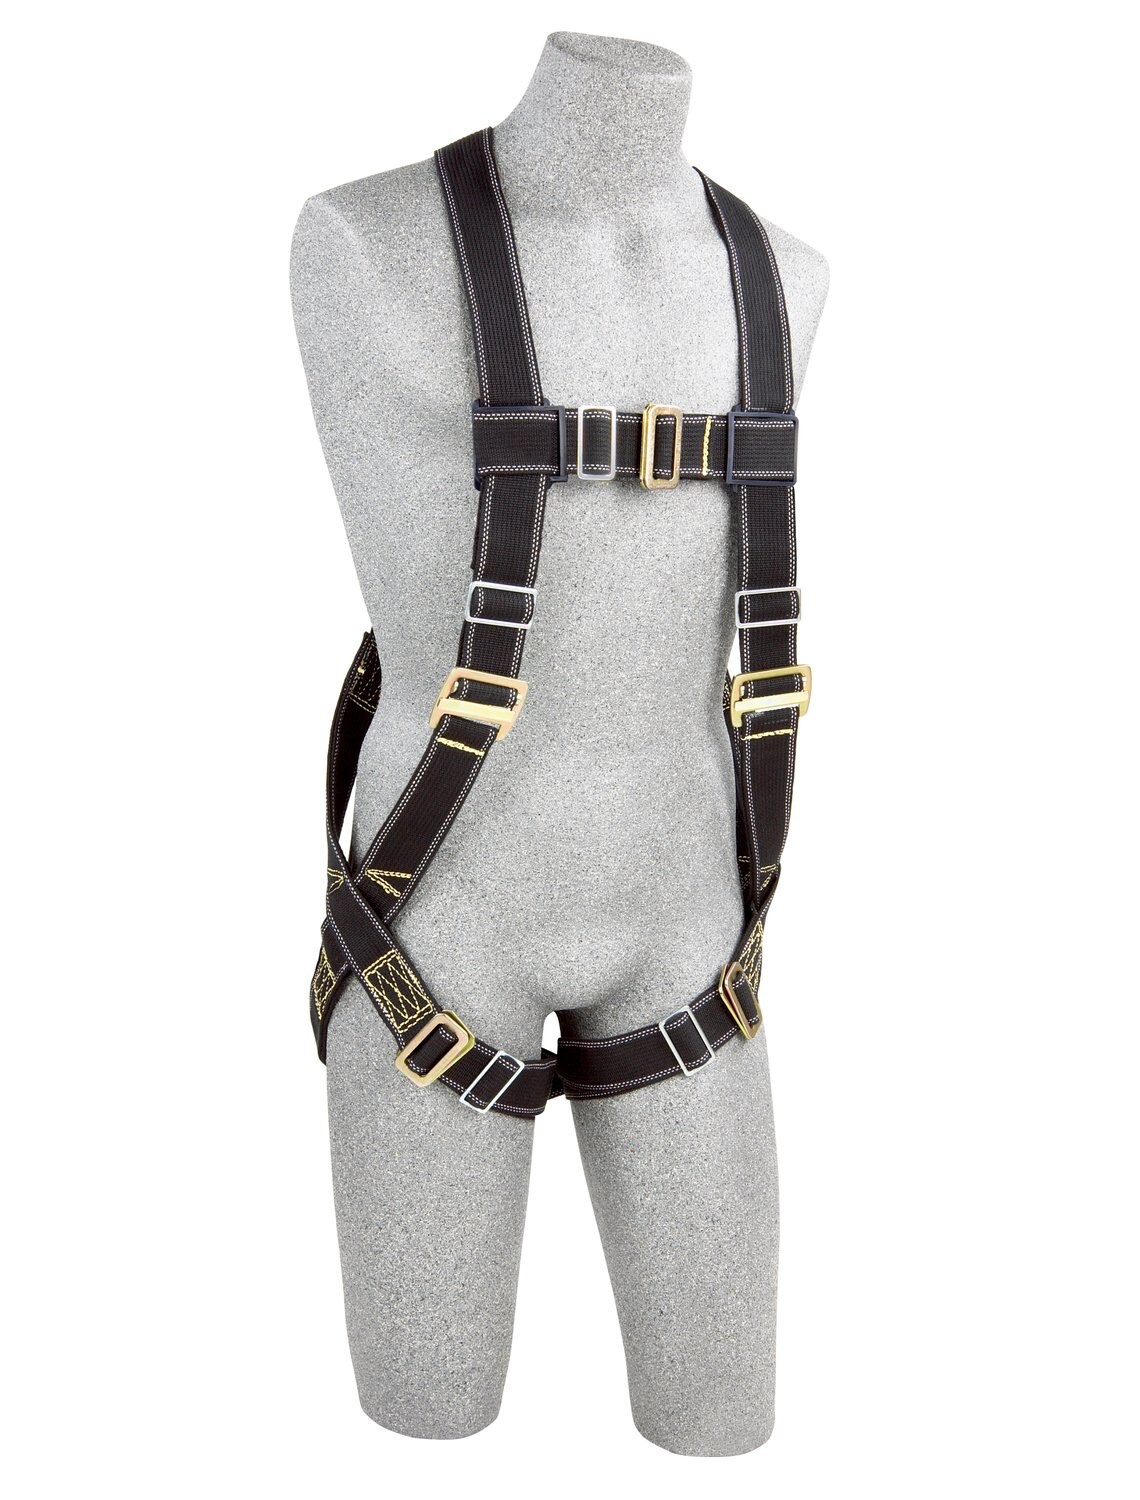 7012815479 - 3M DBI-SALA Delta Hot Work Vest Safety Harness 1104632, Small